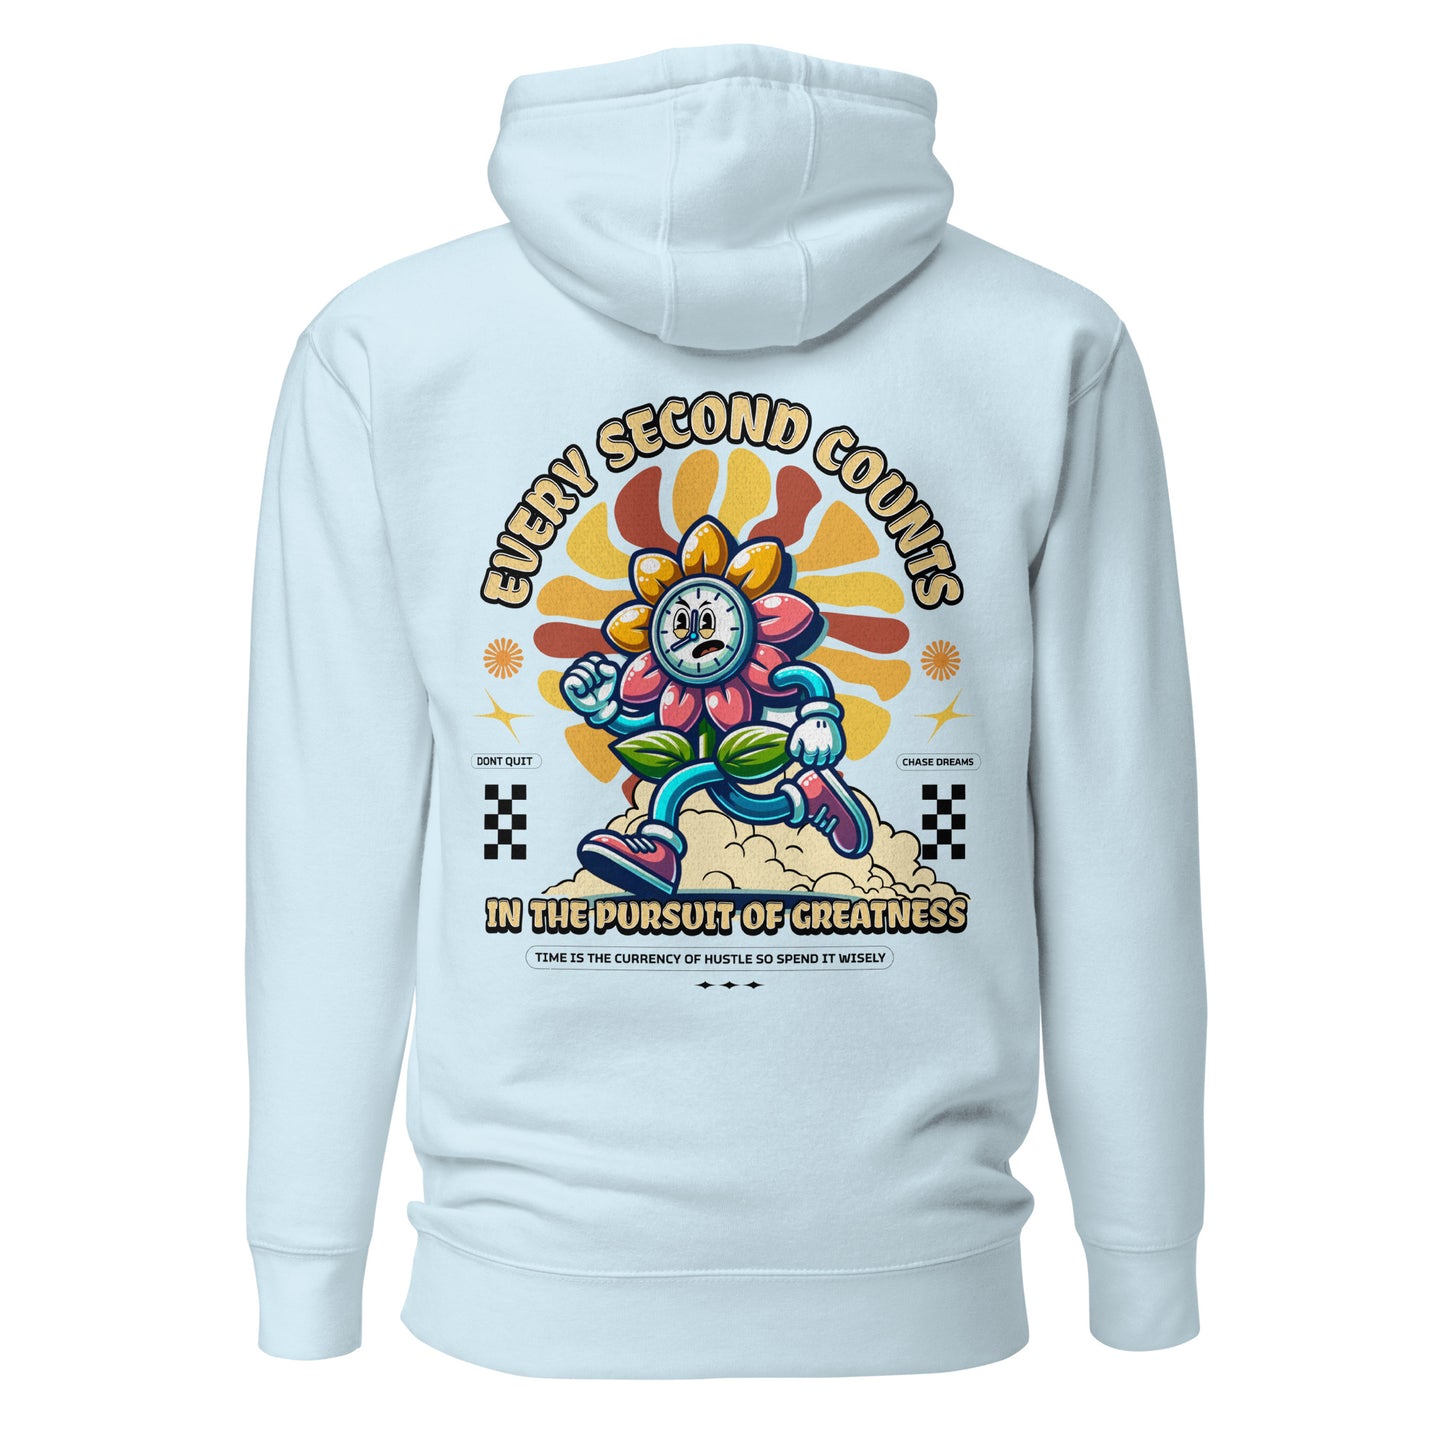 Every second counts in the pursuit of greatness Hoodie